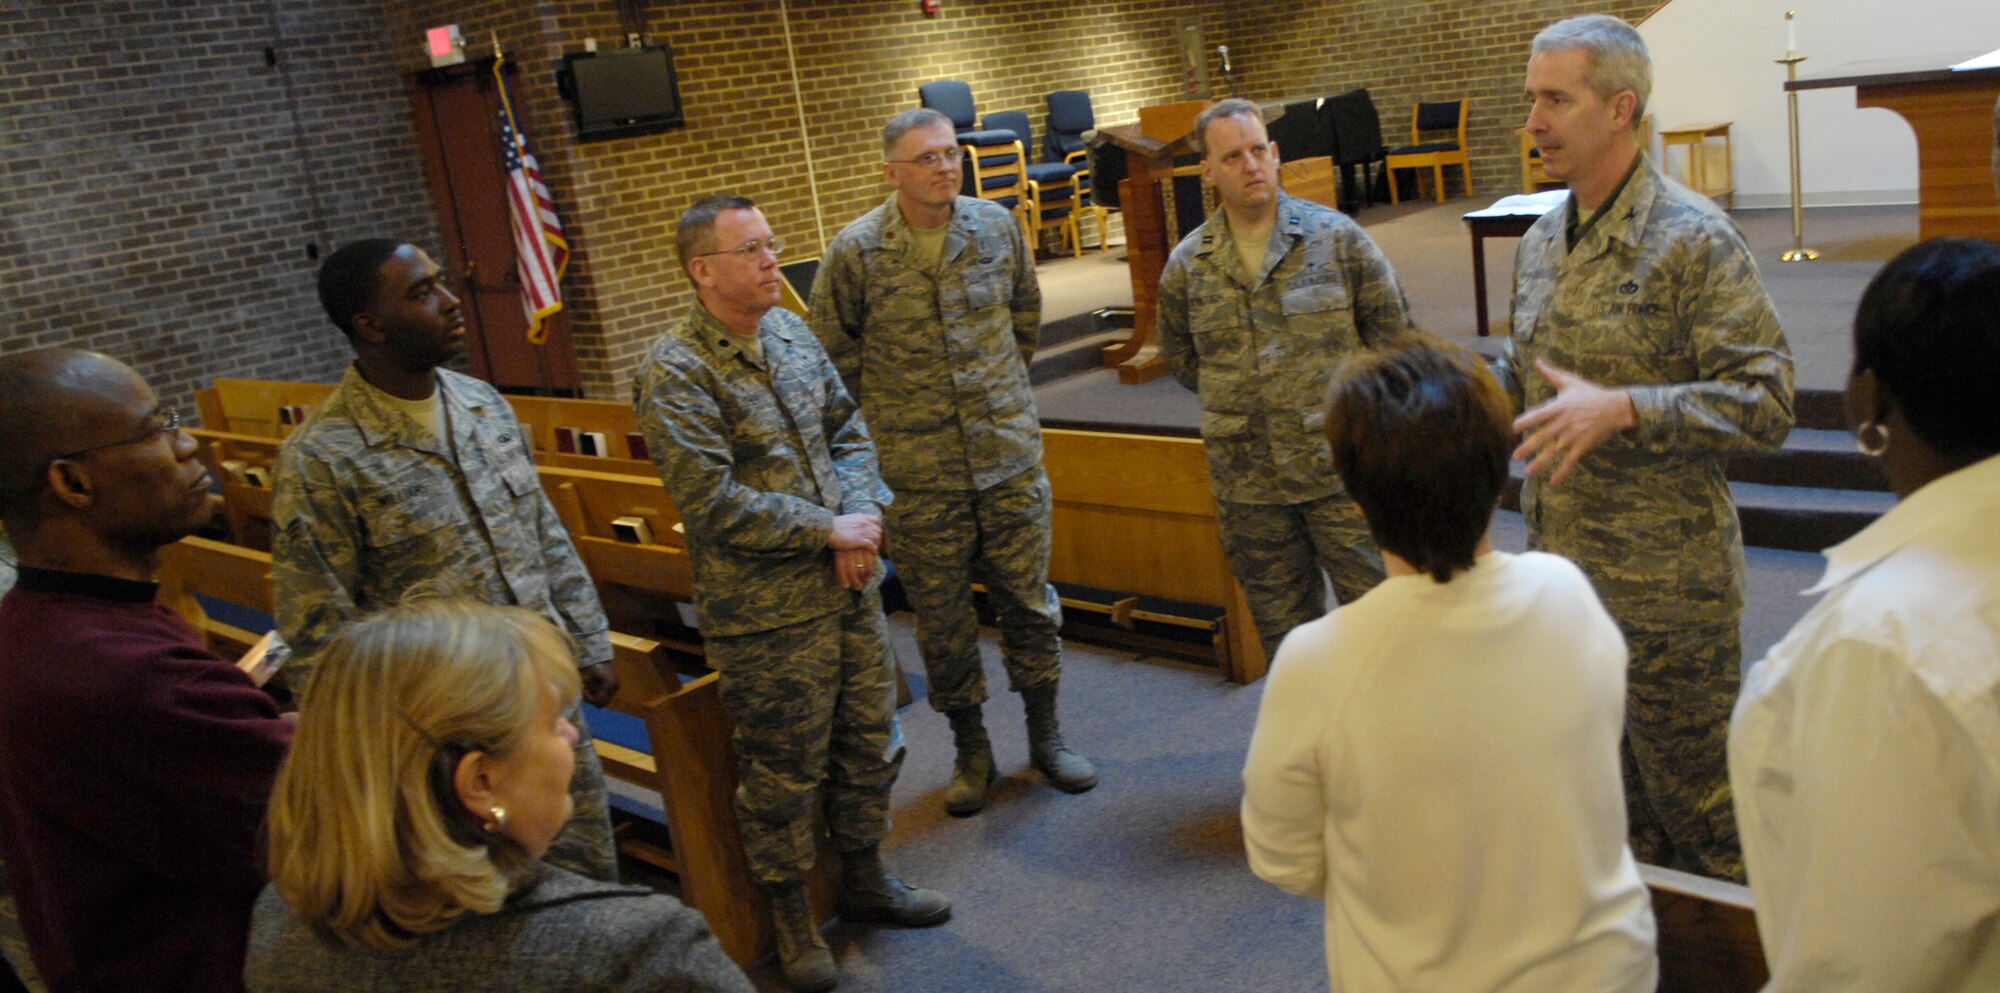 Col. Jon A. Roop, 11th Wing commander, speaks with Bolling’s chapel staff after an awards presentation by Maj. Gen. Ralph J. Jodice II, Air Force District of Washington commander, at Bolling’s main chapel Feb. 25. (U.S. Air Force photo by Senior Airman Alexandre Montes)